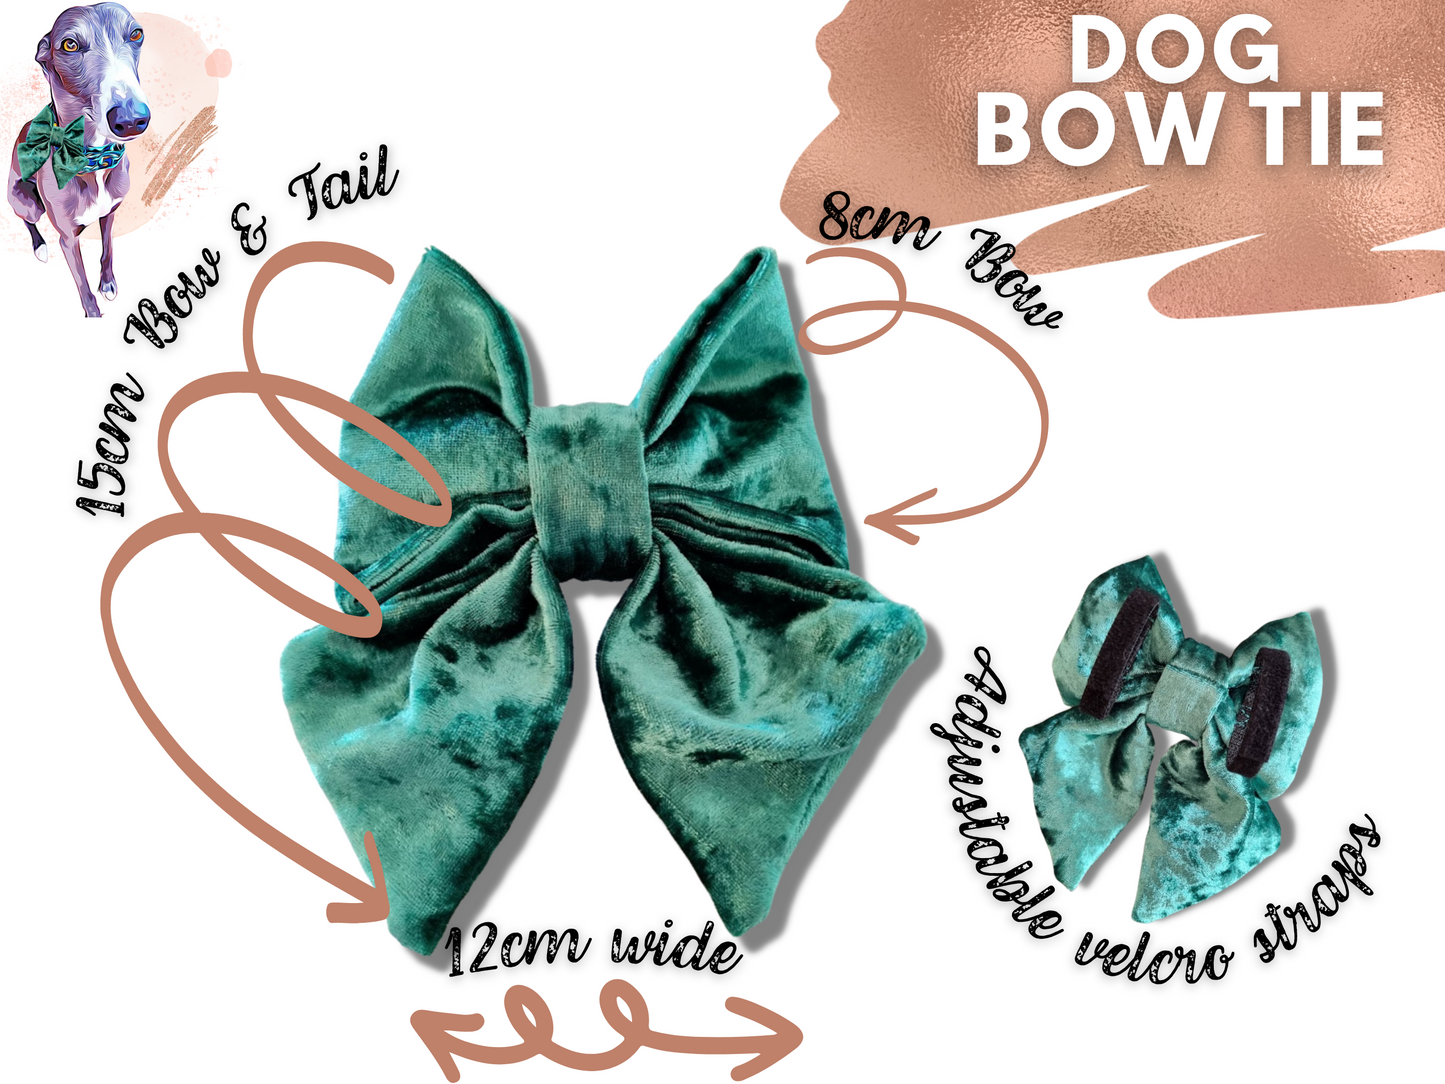 Green Christmas Gingerbread dog bow tie